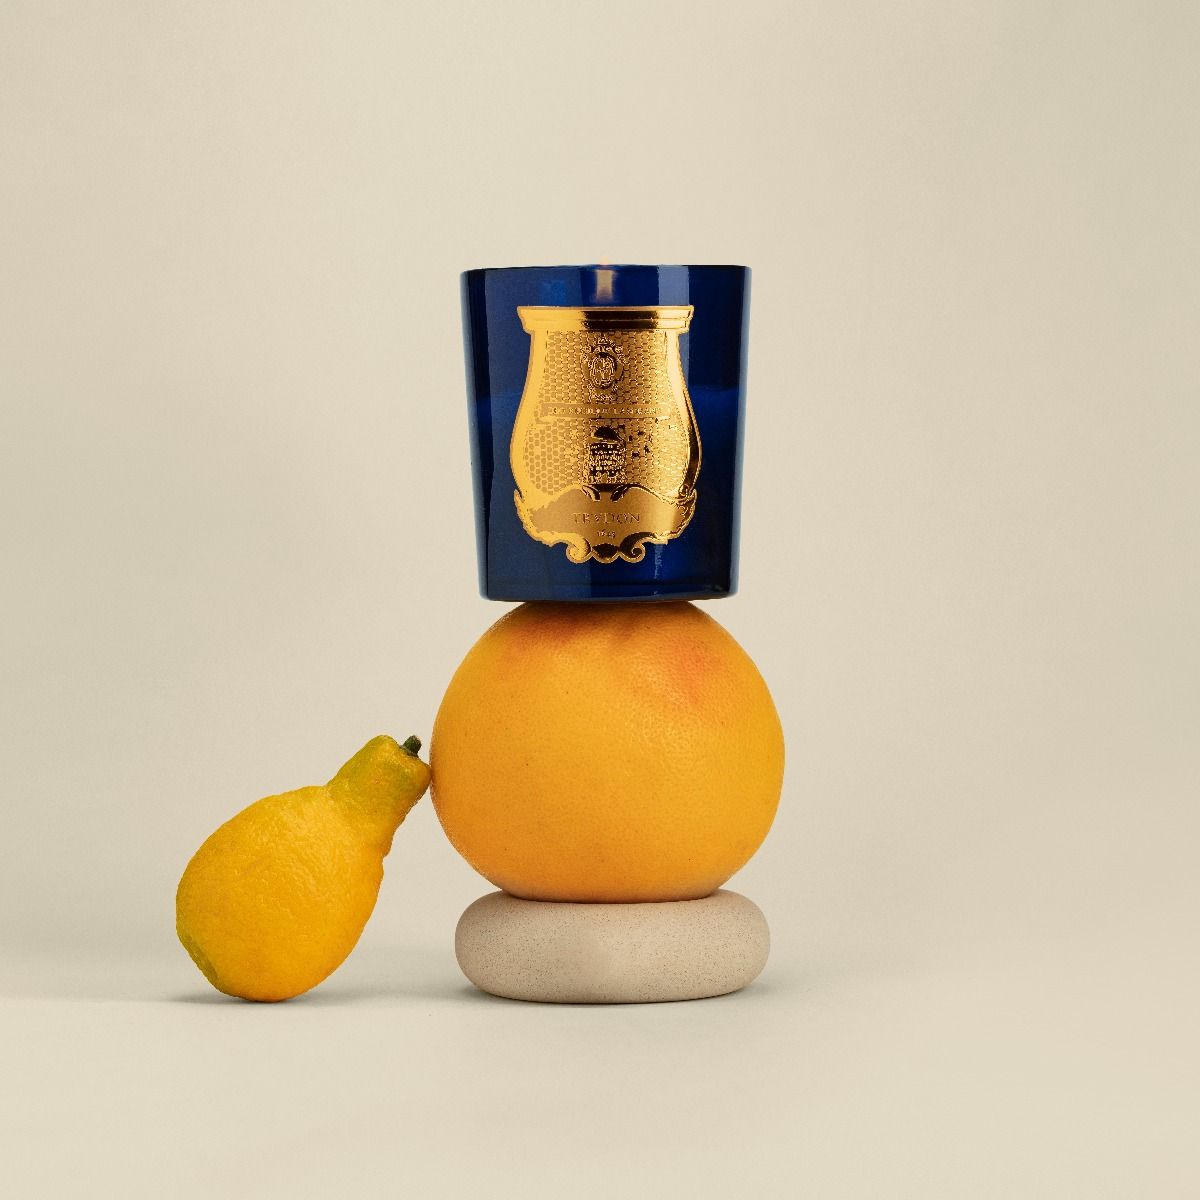 TRUDON CANDLE SALTA 270G – Aleph Gallery